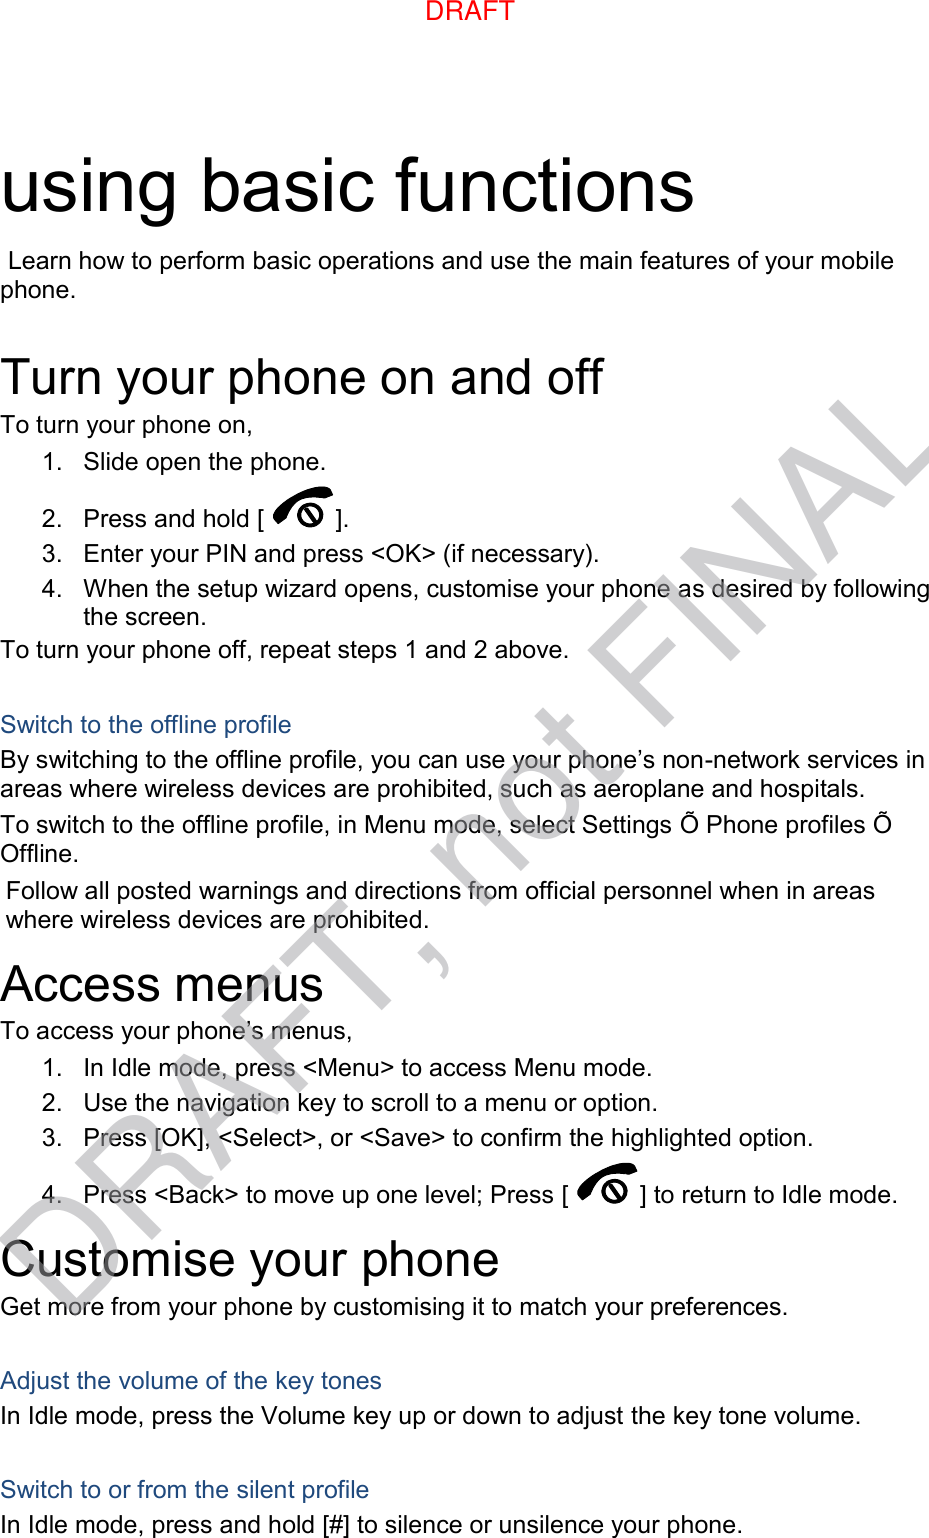 using basic functions  Learn how to perform basic operations and use the main features of your mobile phone.    Turn your phone on and off To turn your phone on, 1.  Slide open the phone. 2.  Press and hold [ ]. 3.  Enter your PIN and press &lt;OK&gt; (if necessary). 4.  When the setup wizard opens, customise your phone as desired by following the screen. To turn your phone off, repeat steps 1 and 2 above.  Switch to the offline profile By switching to the offline profile, you can use your phone’s non-network services in areas where wireless devices are prohibited, such as aeroplane and hospitals. To switch to the offline profile, in Menu mode, select Settings Õ Phone profiles Õ Offline. Follow all posted warnings and directions from official personnel when in areas where wireless devices are prohibited. Access menus To access your phone’s menus, 1.  In Idle mode, press &lt;Menu&gt; to access Menu mode. 2.  Use the navigation key to scroll to a menu or option. 3.  Press [OK], &lt;Select&gt;, or &lt;Save&gt; to confirm the highlighted option. 4.  Press &lt;Back&gt; to move up one level; Press [ ] to return to Idle mode. Customise your phone Get more from your phone by customising it to match your preferences.  Adjust the volume of the key tones In Idle mode, press the Volume key up or down to adjust the key tone volume.  Switch to or from the silent profile In Idle mode, press and hold [#] to silence or unsilence your phone. DRAFT, not FINALDRAFT